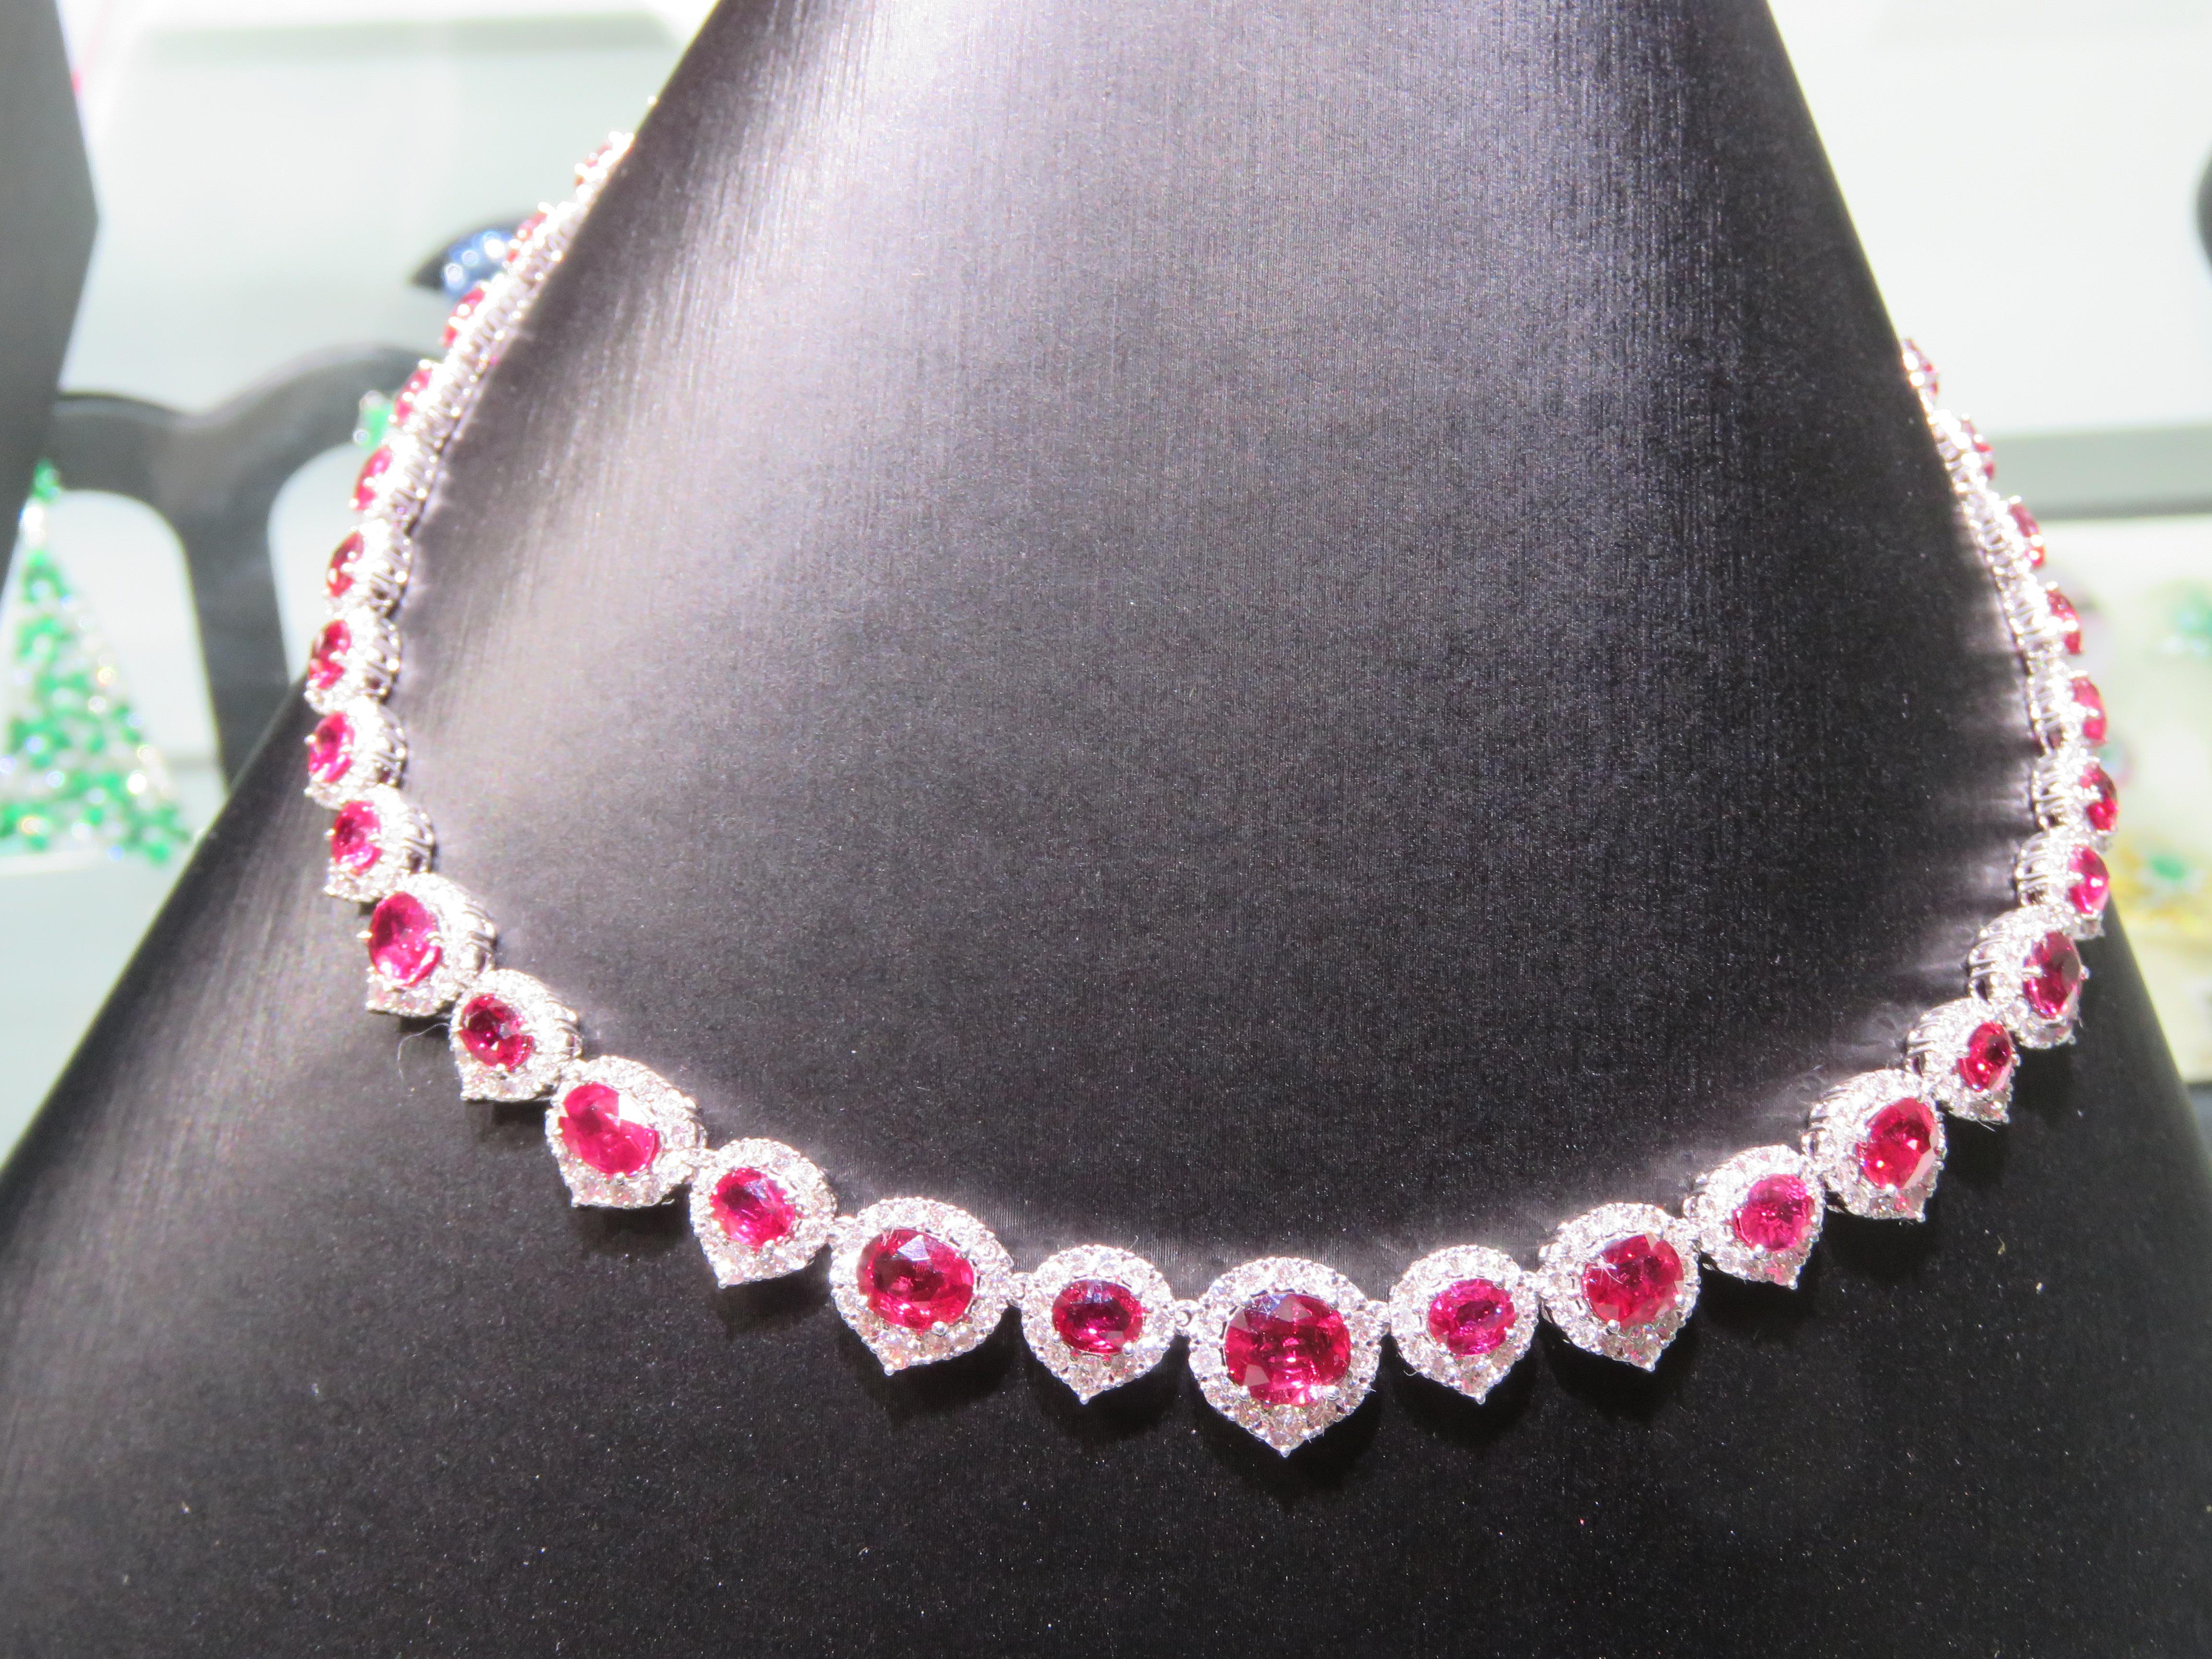 The Following Items we are offering is a Rare Important Radiant 18KT White Gold Necklace consisting of Fancy Oval Shaped Glittering Rubies and surrounded with Magnificent Diamonds Throughout. Features Large Certified Faceted Rubies interlocked